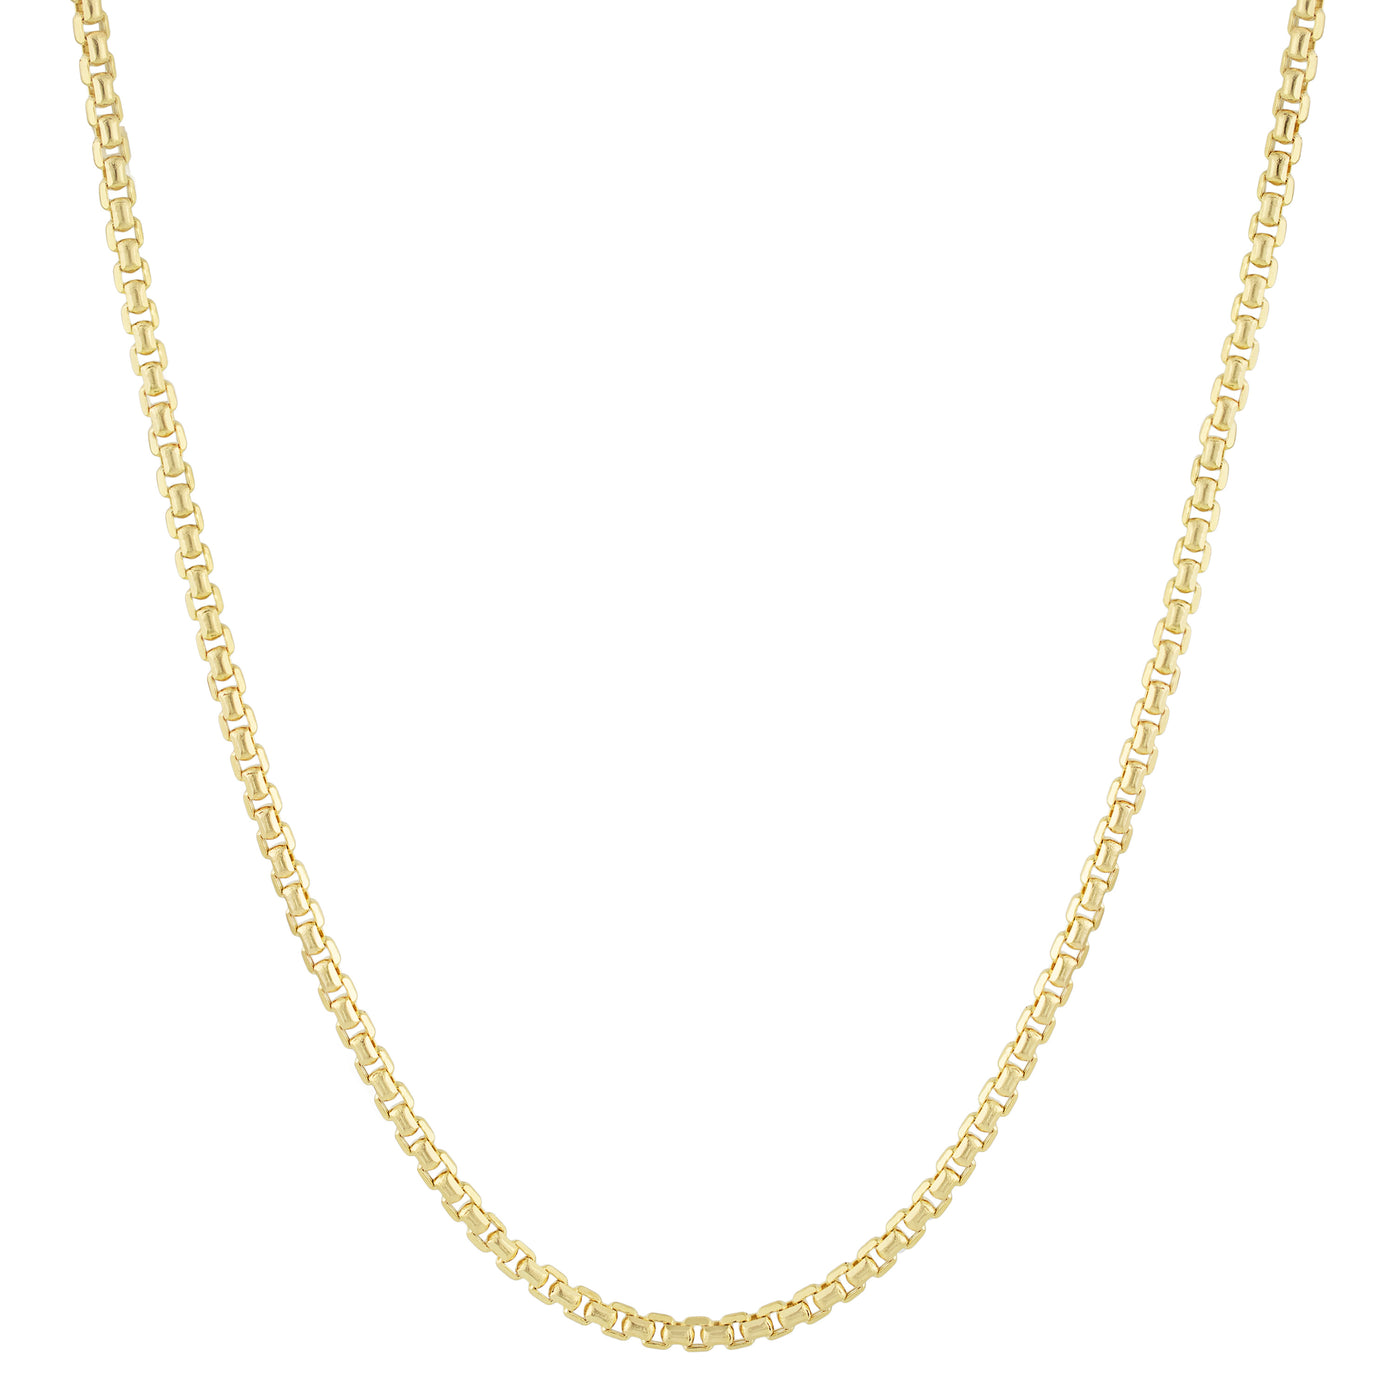 Women's Round Box Link Chain Necklace 14K Yellow Gold - Hollow